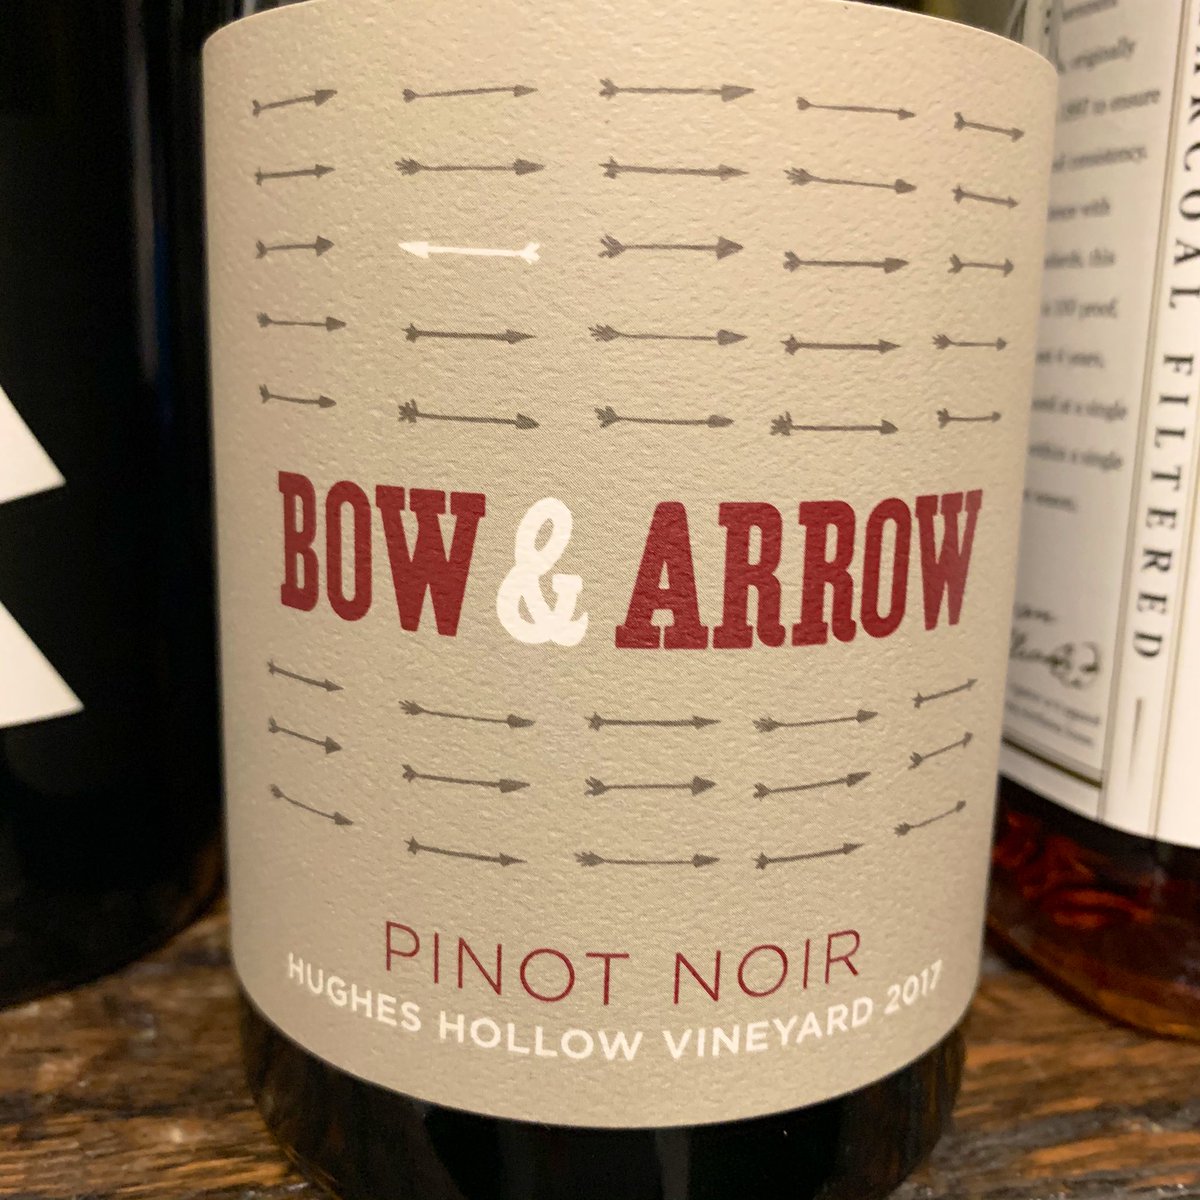 So this @bowandarrowwine Pinot is stellar: fruit, funk, acidity. Love it. So much good new stuff in OK from @ProvisionsOk @TheTulsaVoice @405Mag @wvwines